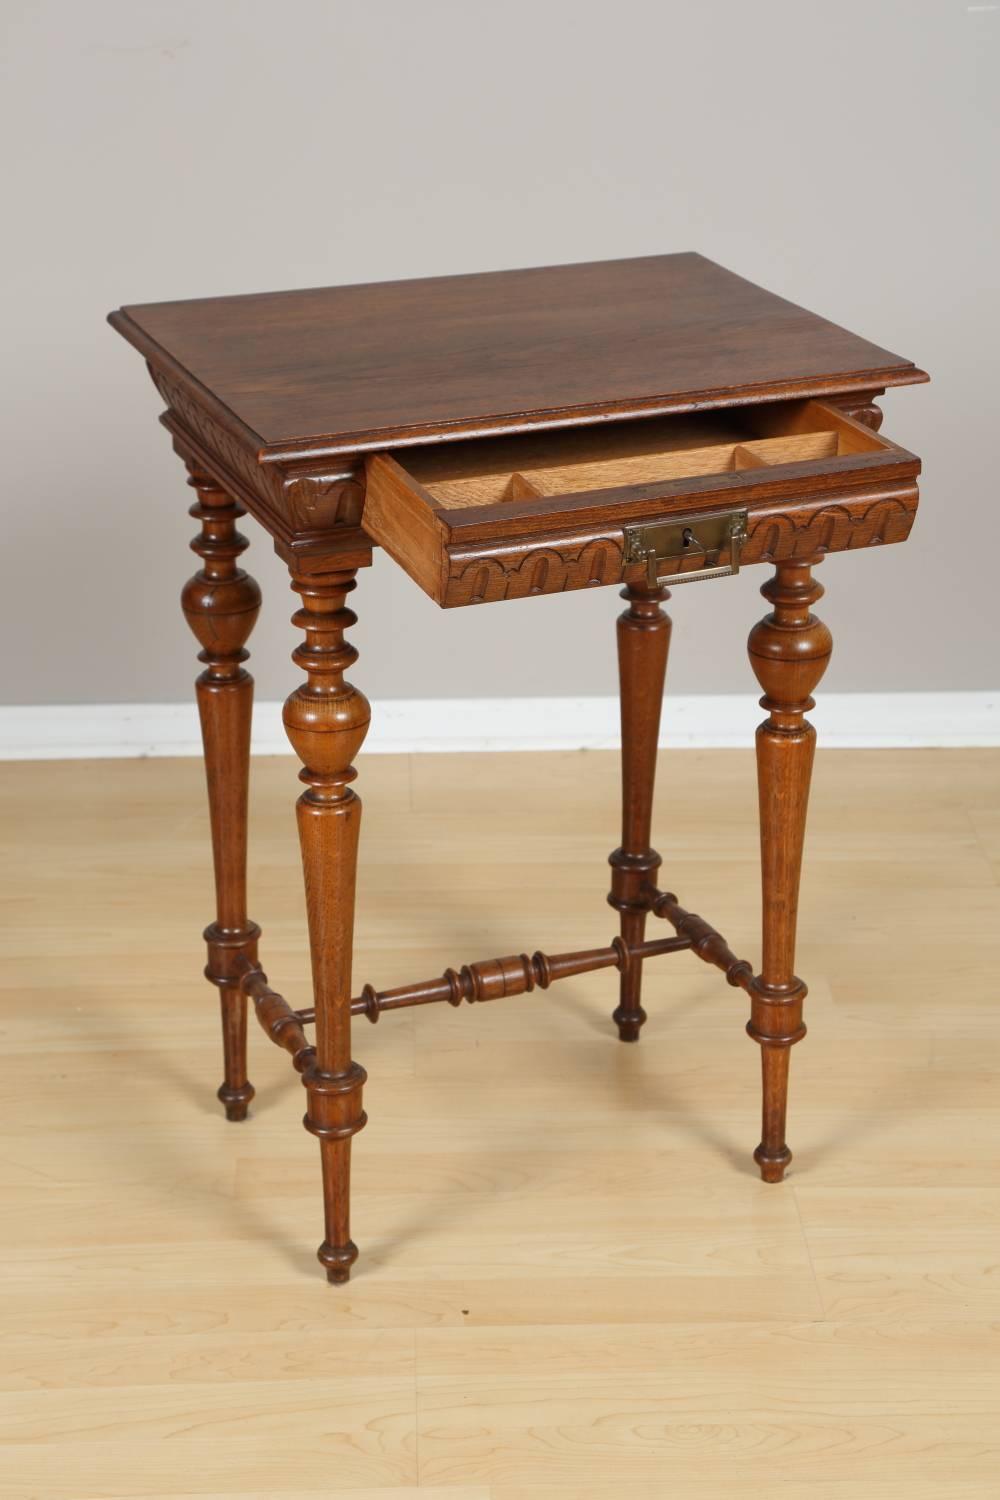 Oak side table, circa 1880. Elegant oak side table with one drawer, in very good original condition. Complimentary delivery and set up within 100 mile radius from Chicago, IL.